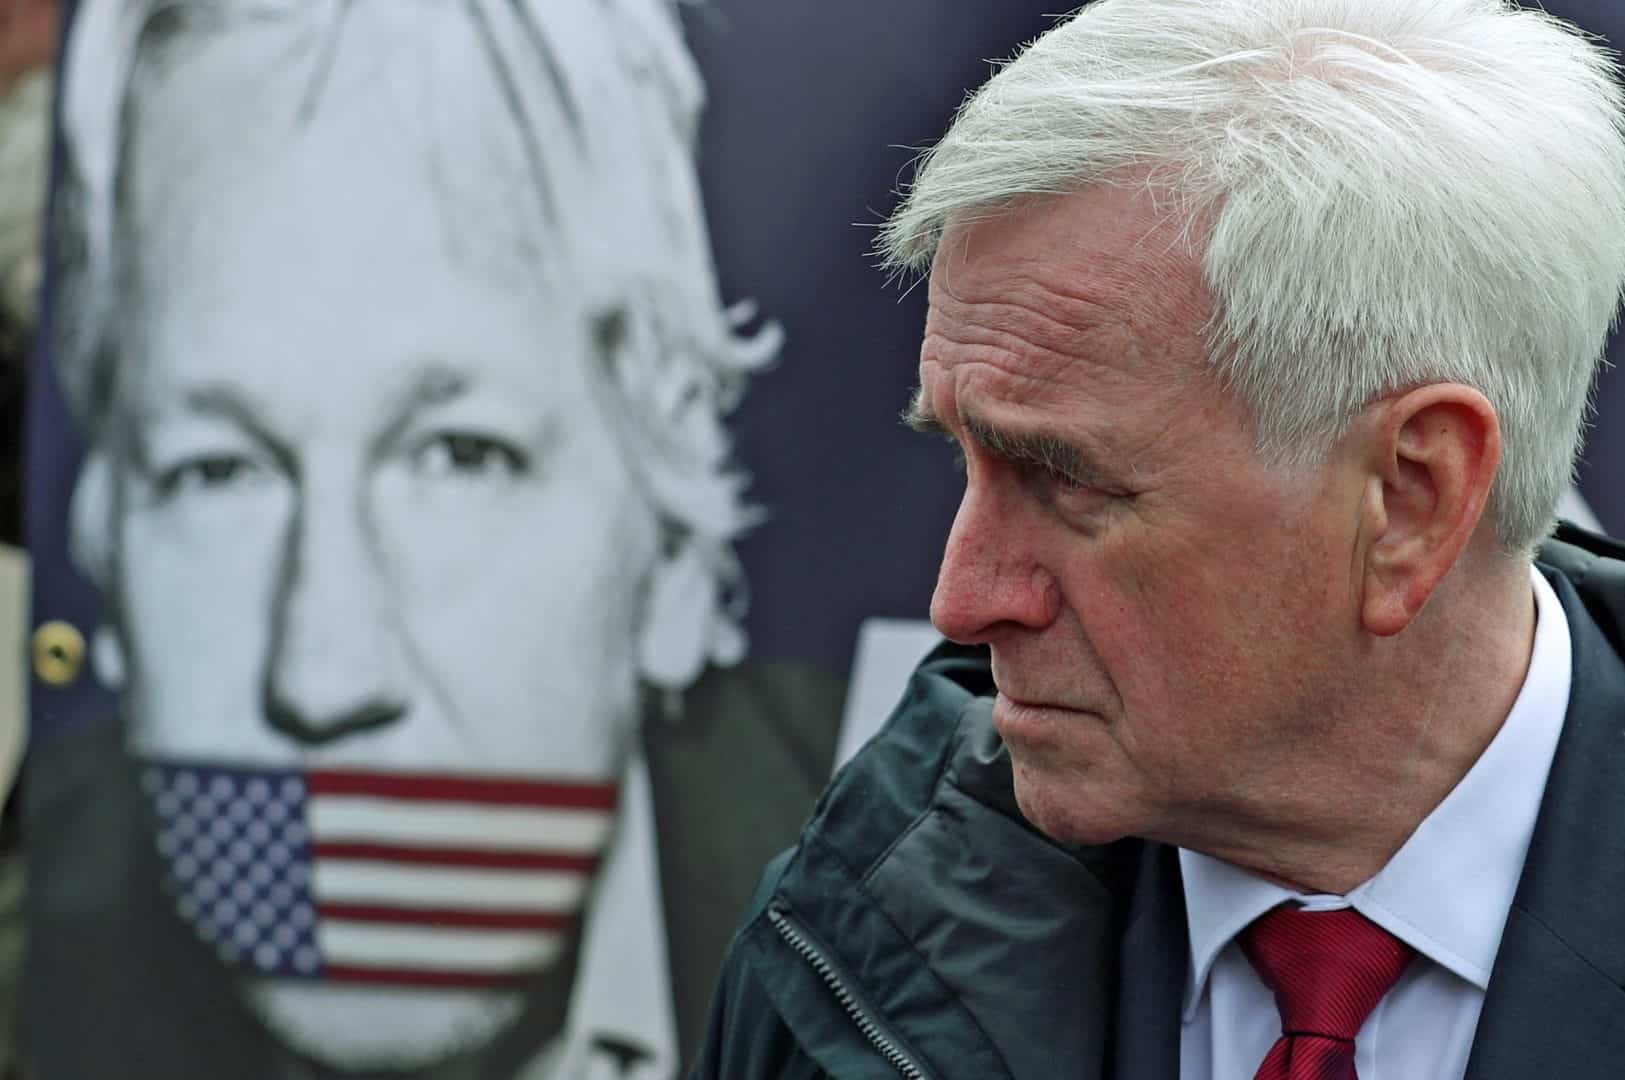 Labour’s John McDonnell says Julian Assange should not be extradited to US